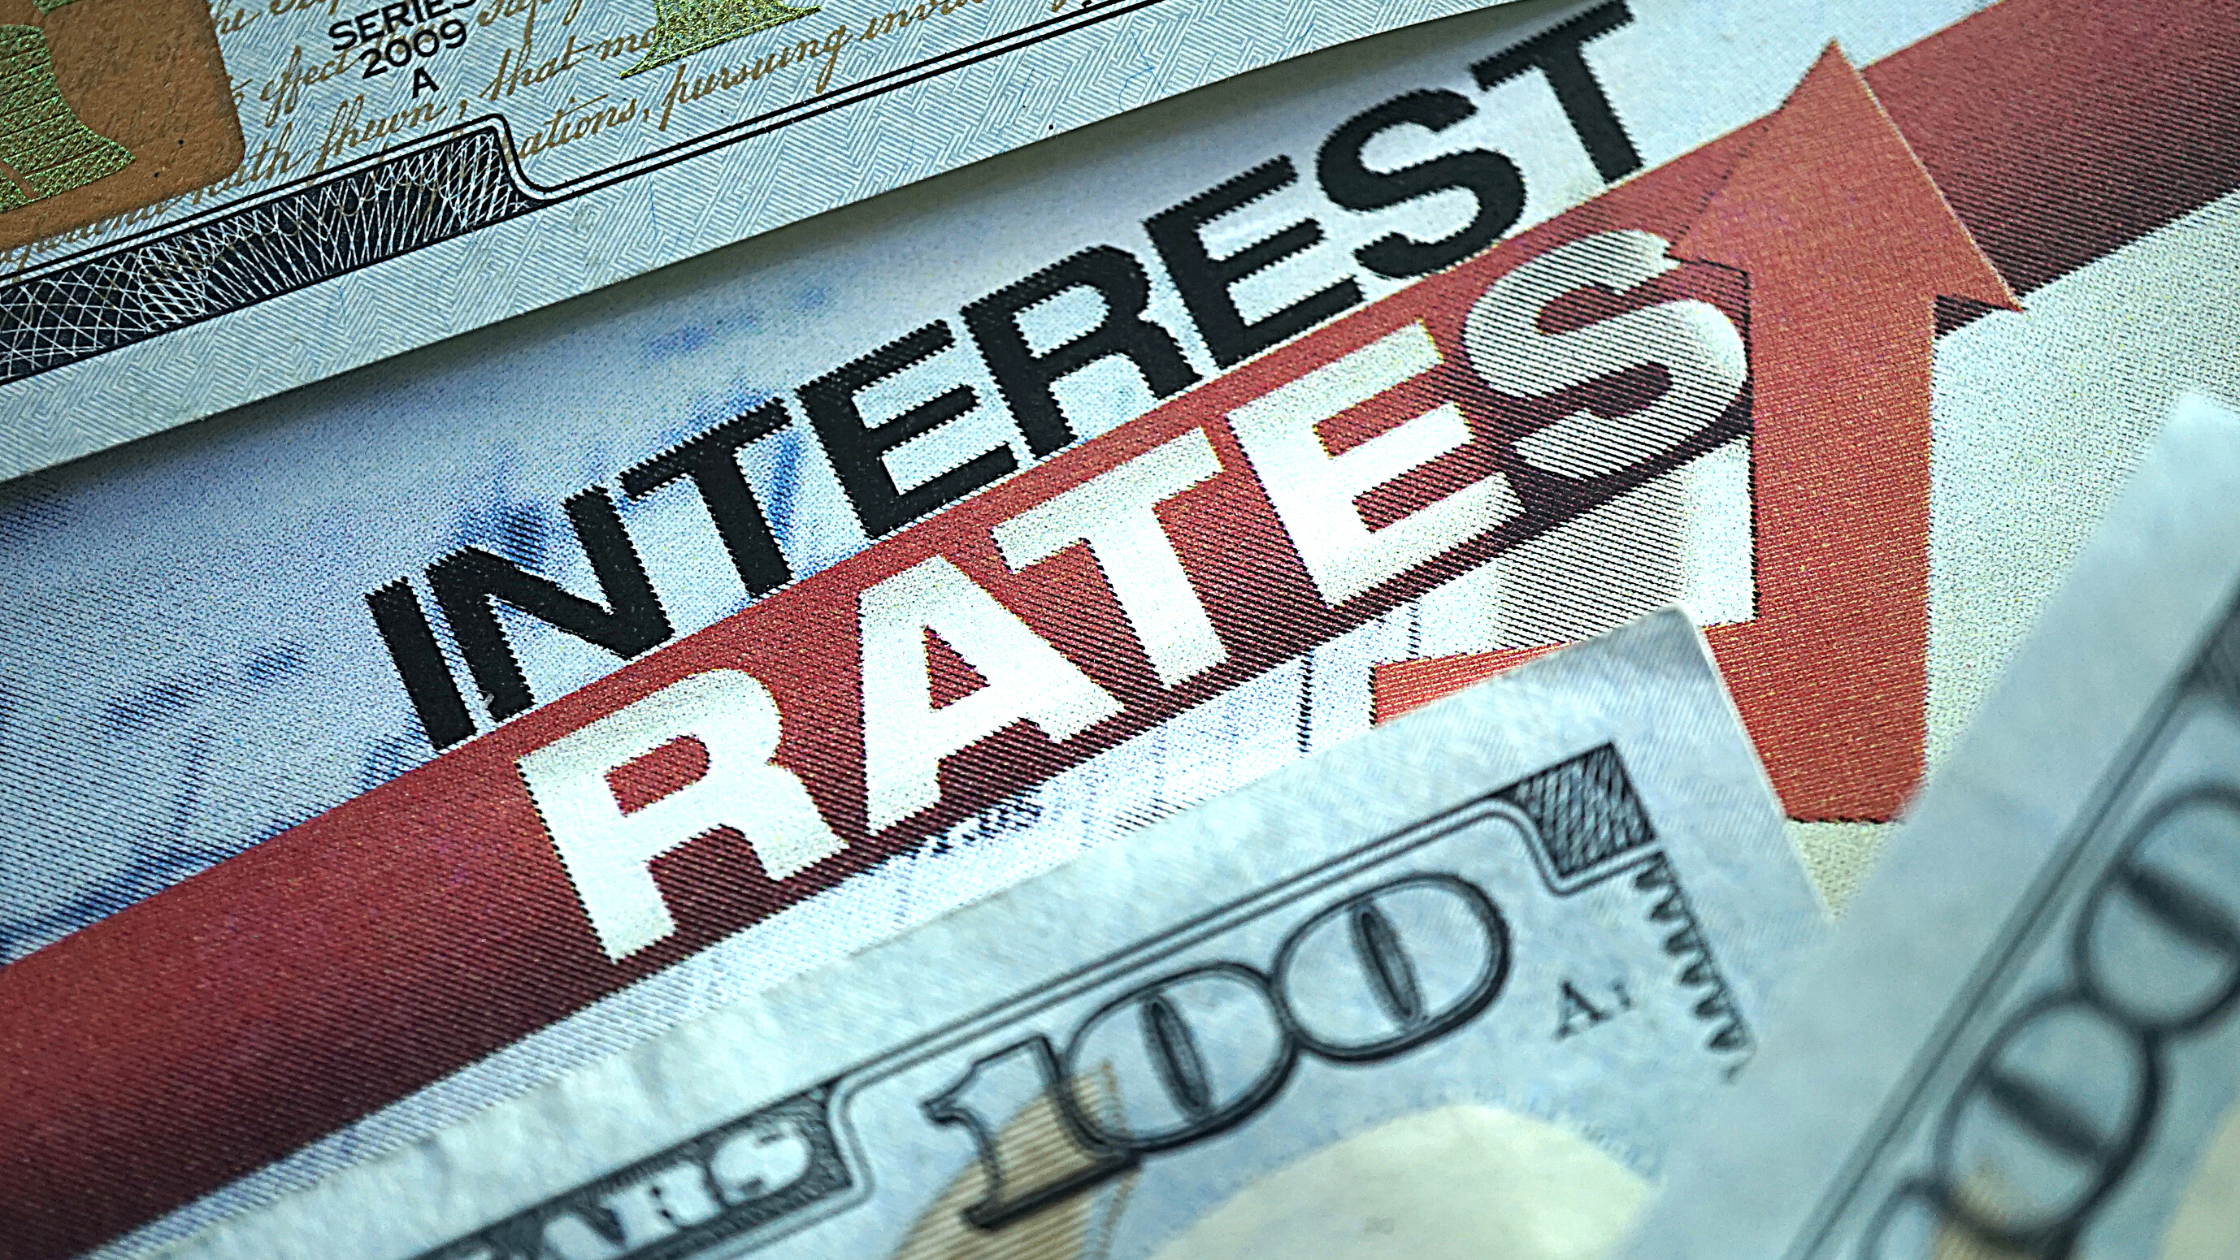 Interest Rate Hikes are the Wrong Tool: Positive Money US Response